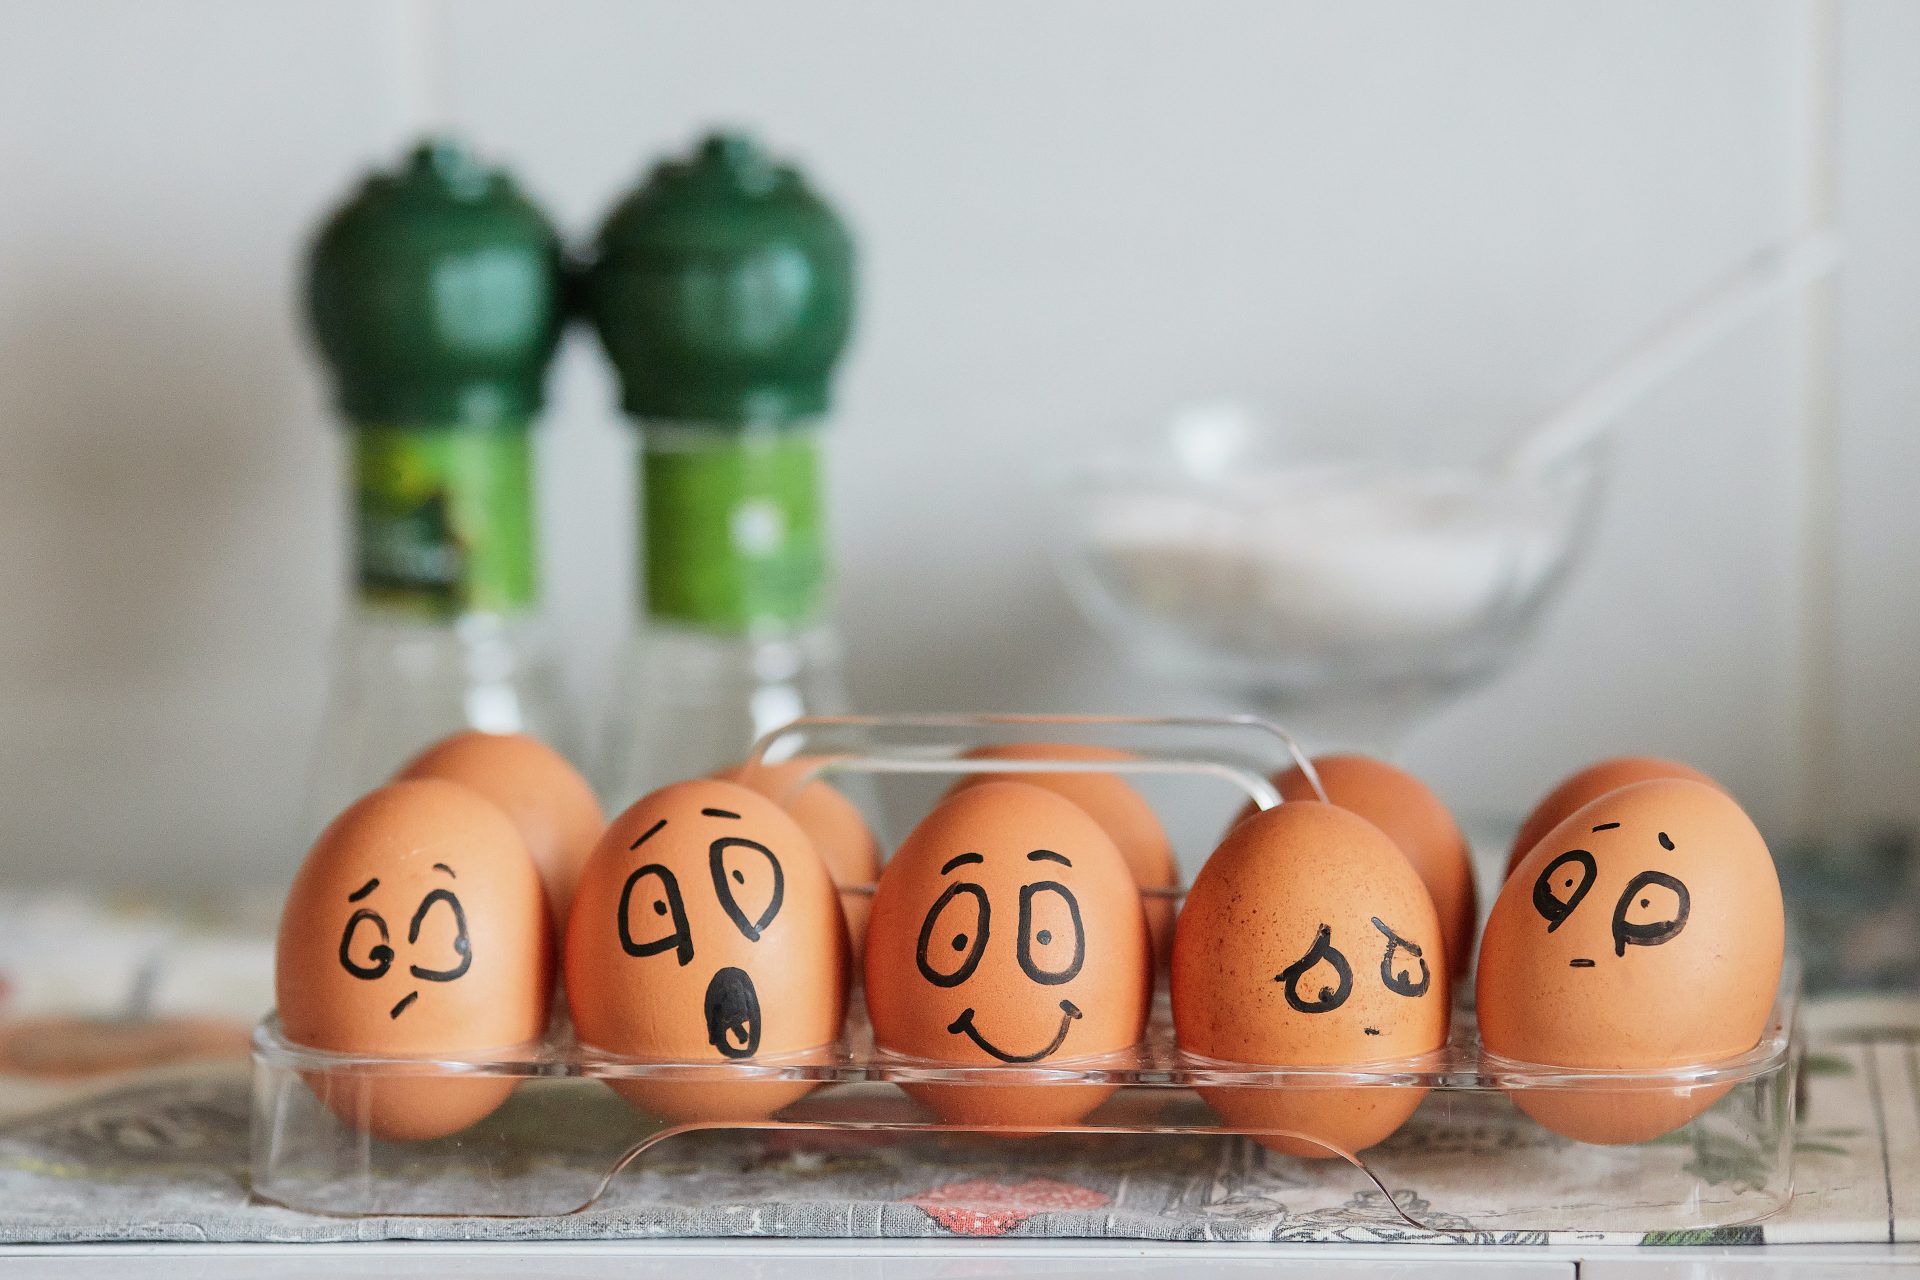 Eggs showing different emotions